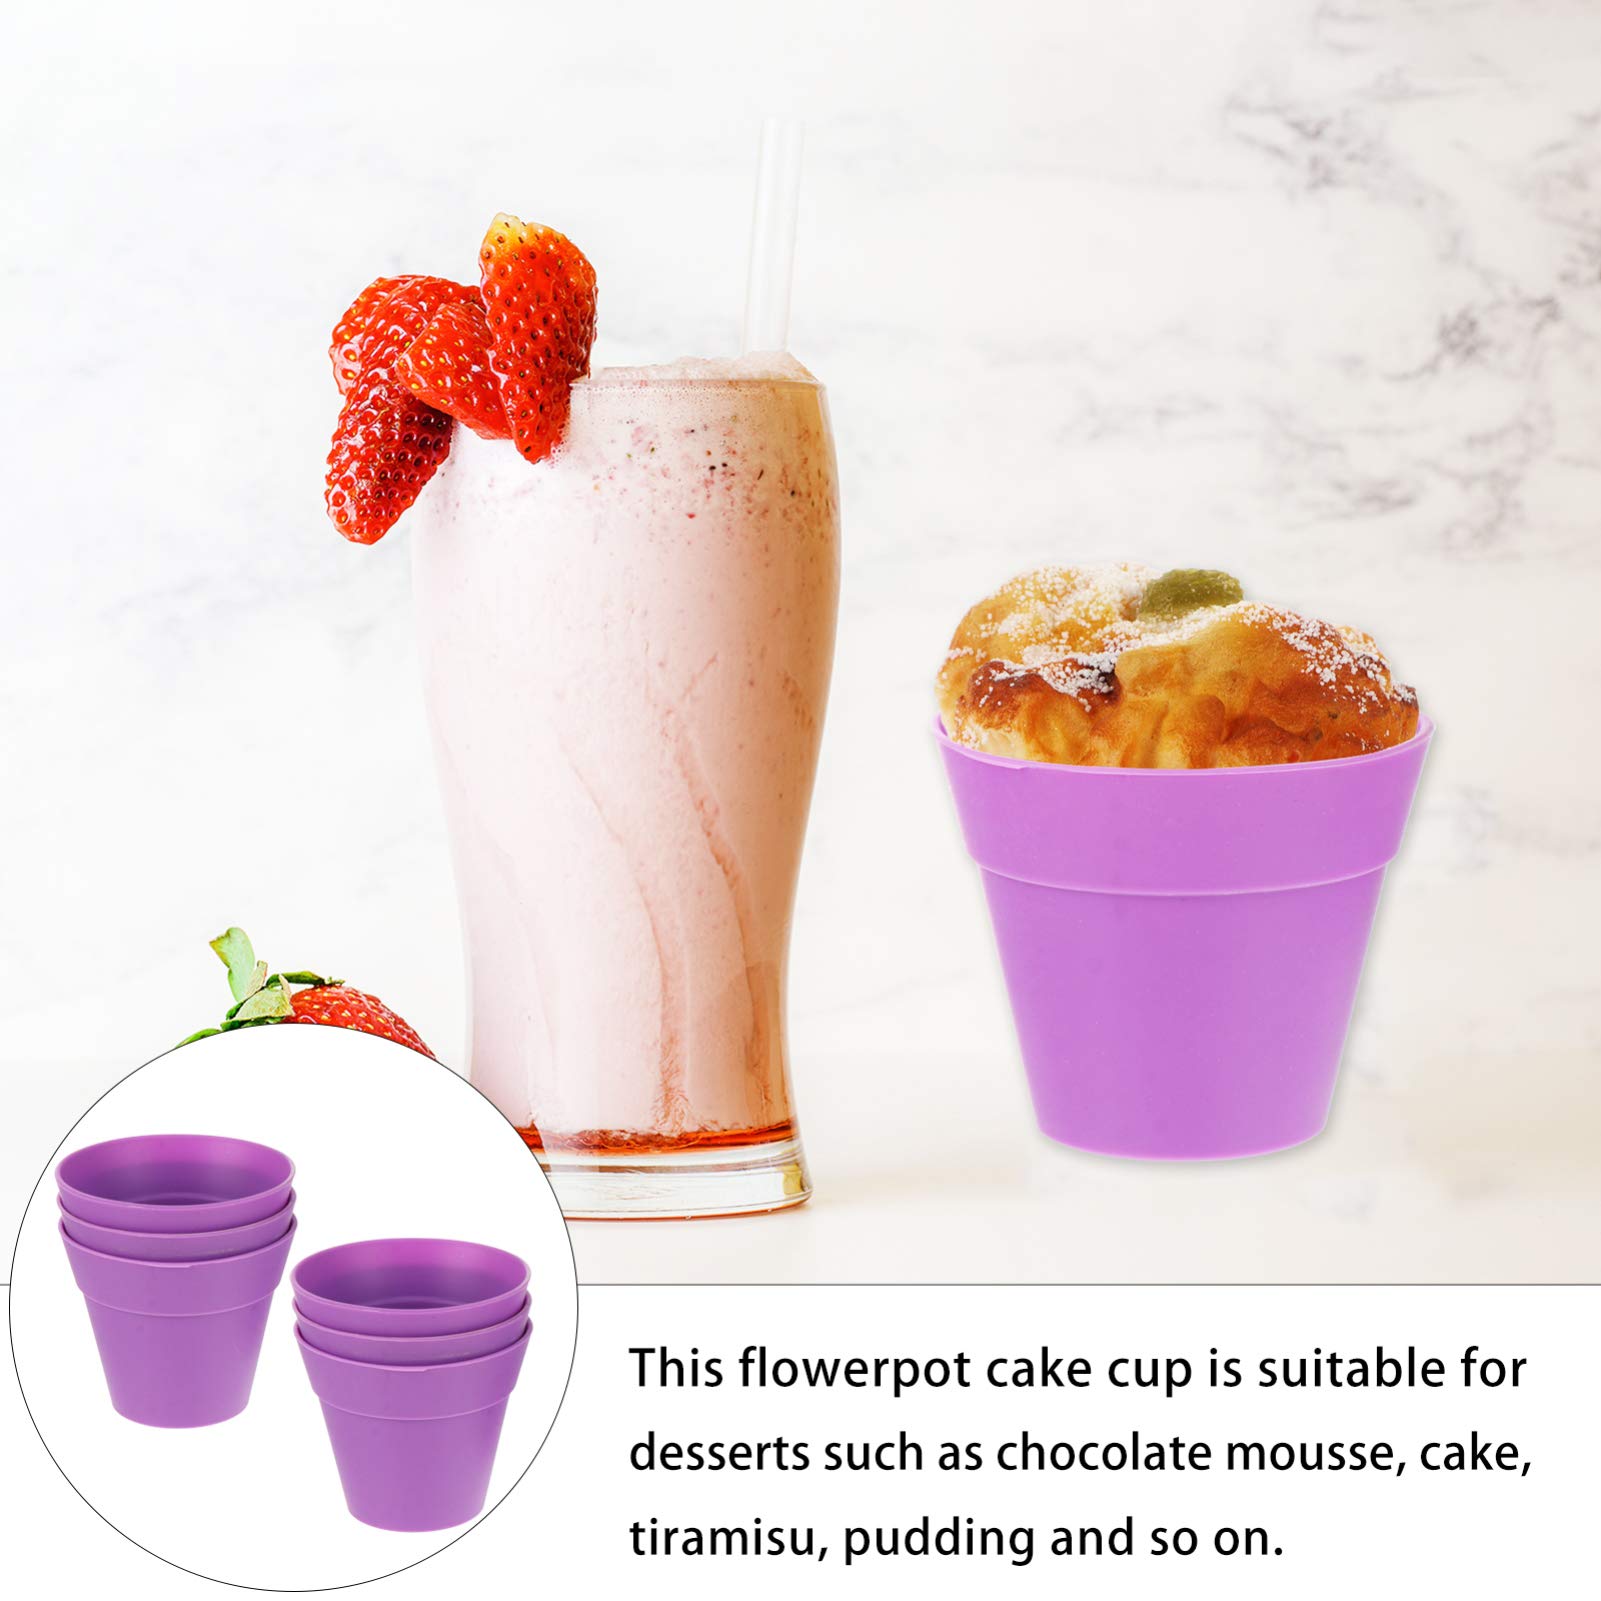 6pcs Flowerpot Dessert Cup Plastic Cake Cups with Lid Shovel Spoon Cupcake Plant Nursery Pots with Dome for Indoor Outdoor Plant Succulent Display Ice Cream Yogurt Containers Holder